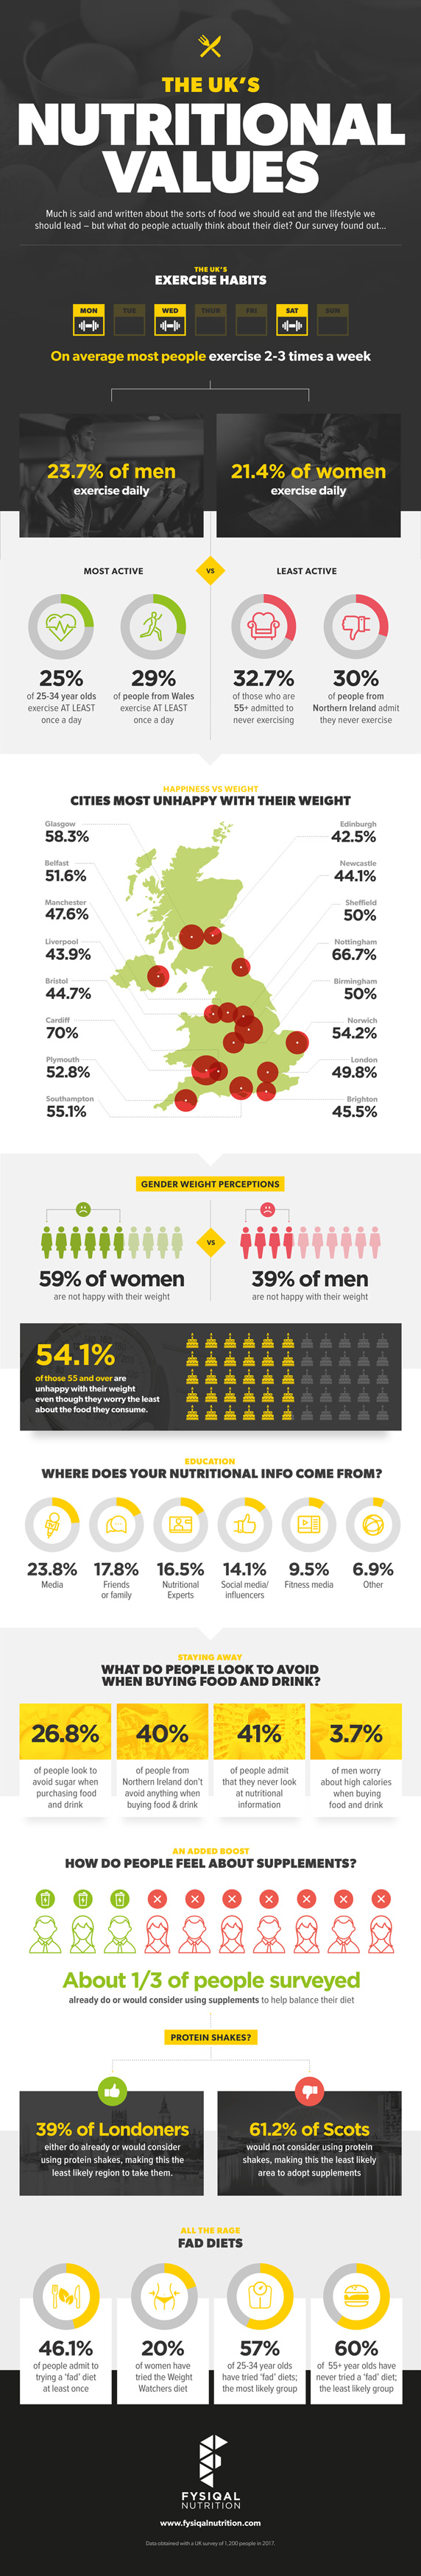 The UK's Nutritional Values - Infographic